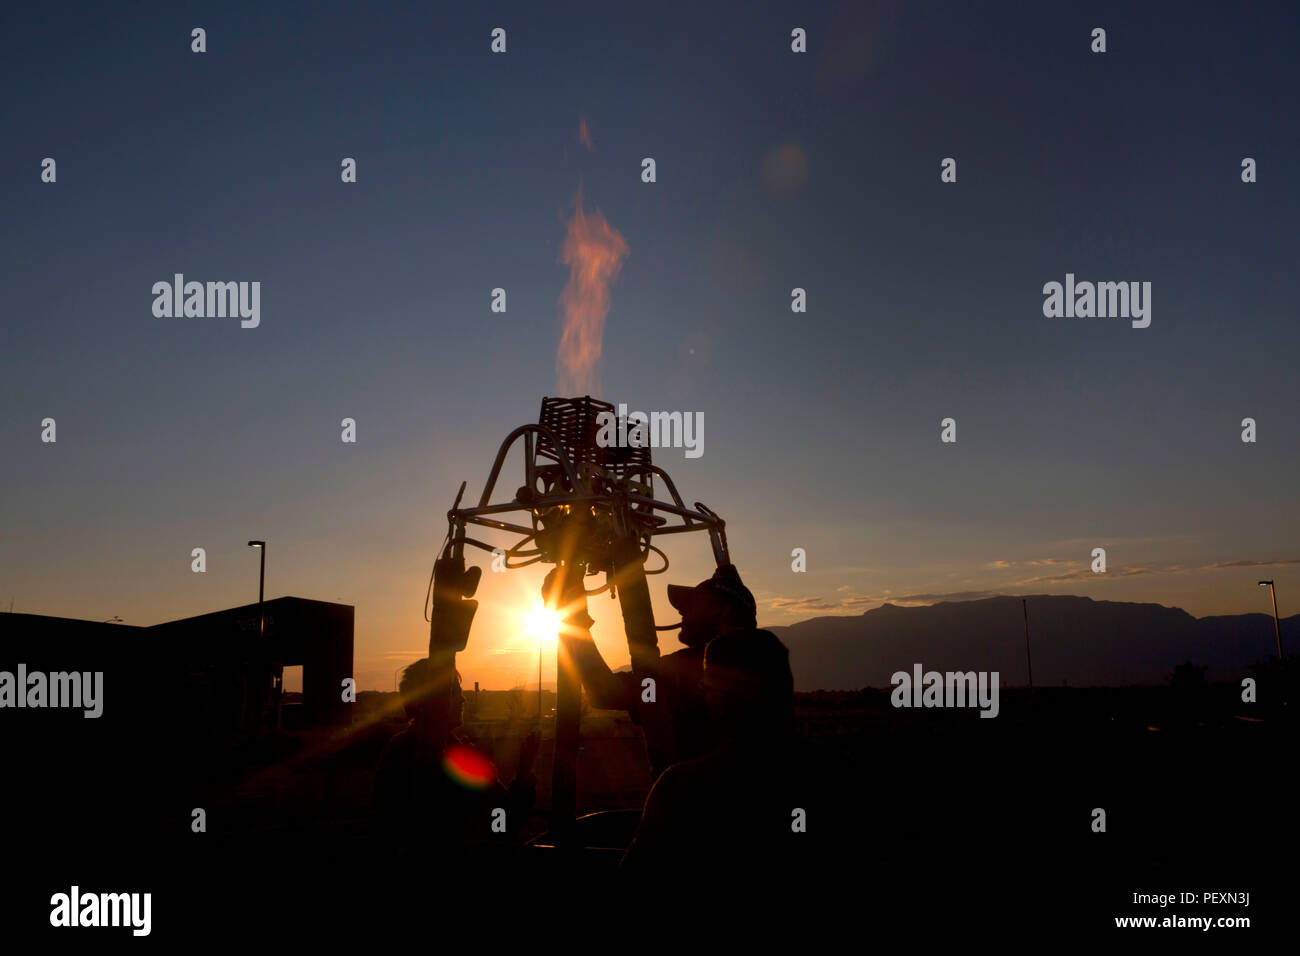 View of men operating hot air balloon burner at sunset, Albuquerque, New Mexico, USA Stock Photo